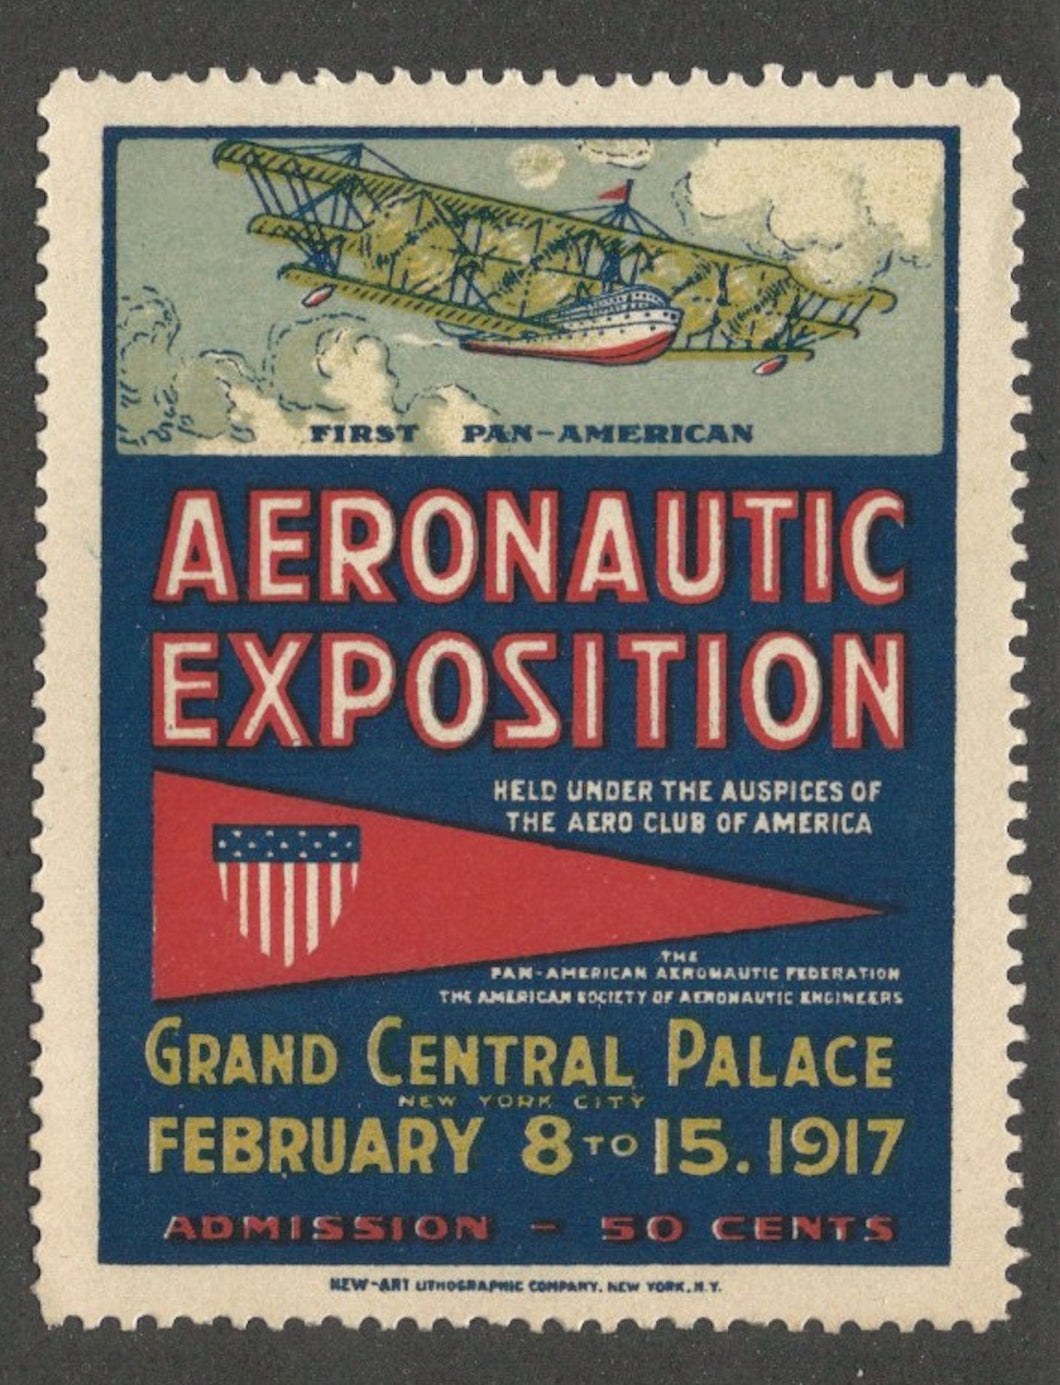 Aero Club of America, 1917 Aeronautic Exposition, Grand Central Palace, New York City, Poster Stamp